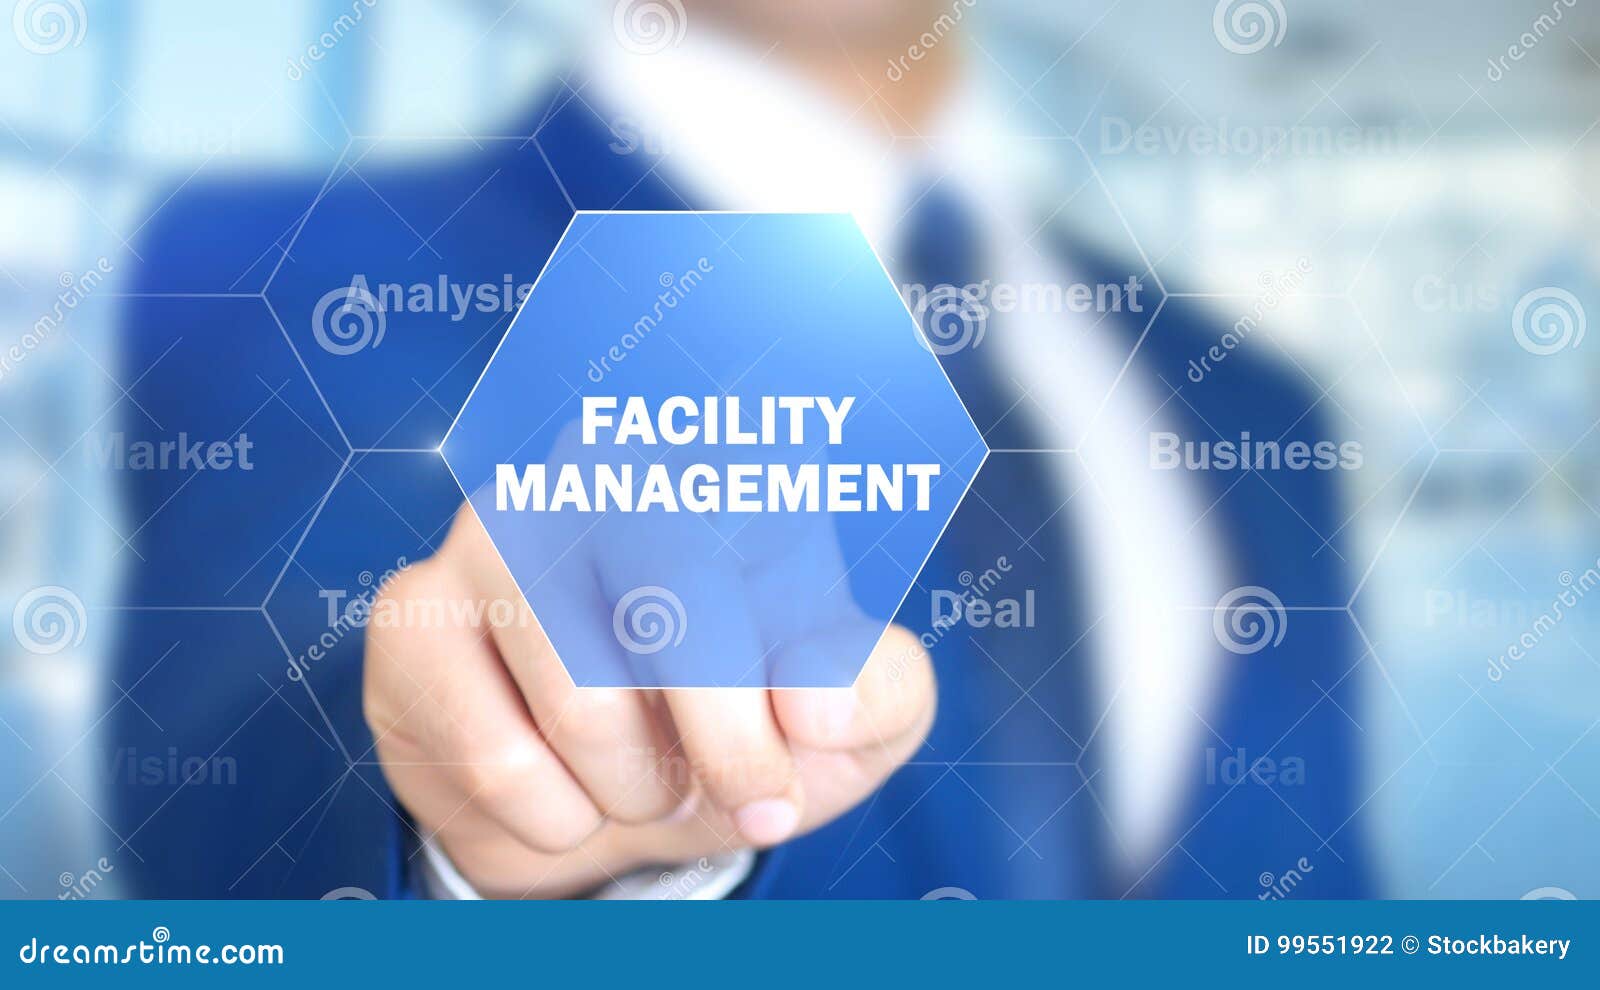 facility management, man working on holographic interface, visual screen